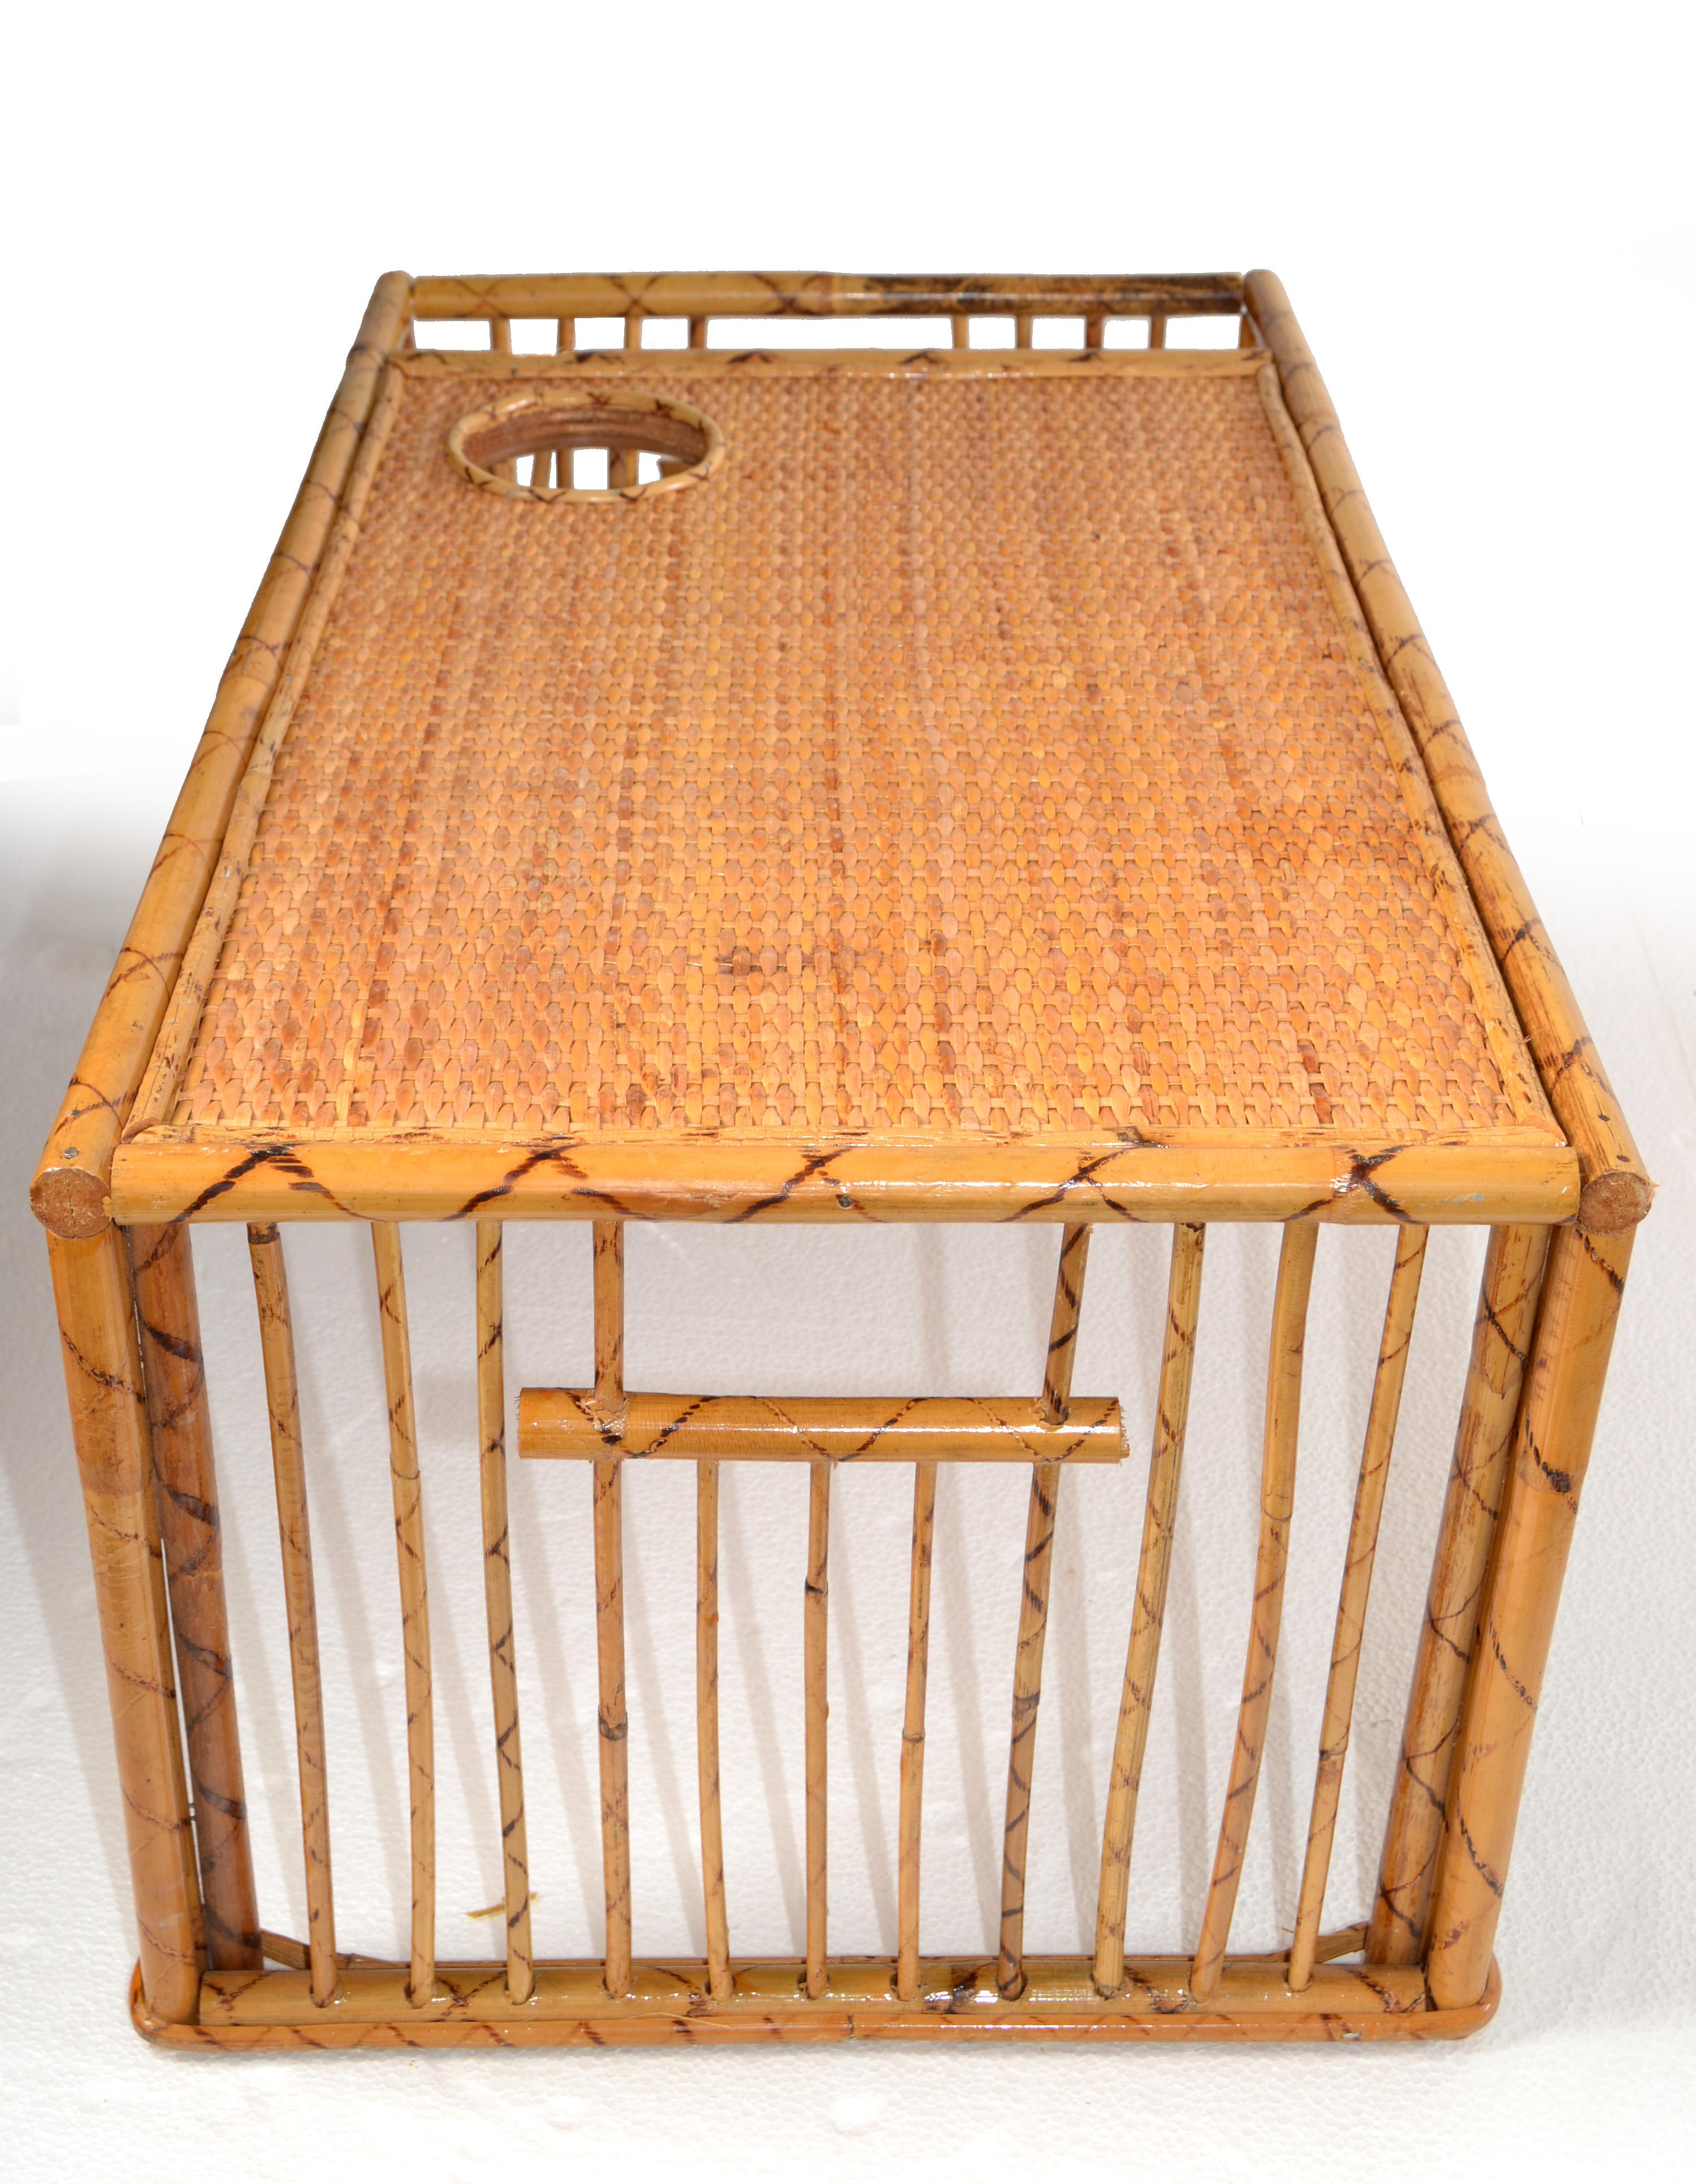 Chinese Export Bohemian Handwoven Reed Caning Bamboo Breakfast Bed Tray Table Cup Book Holder For Sale